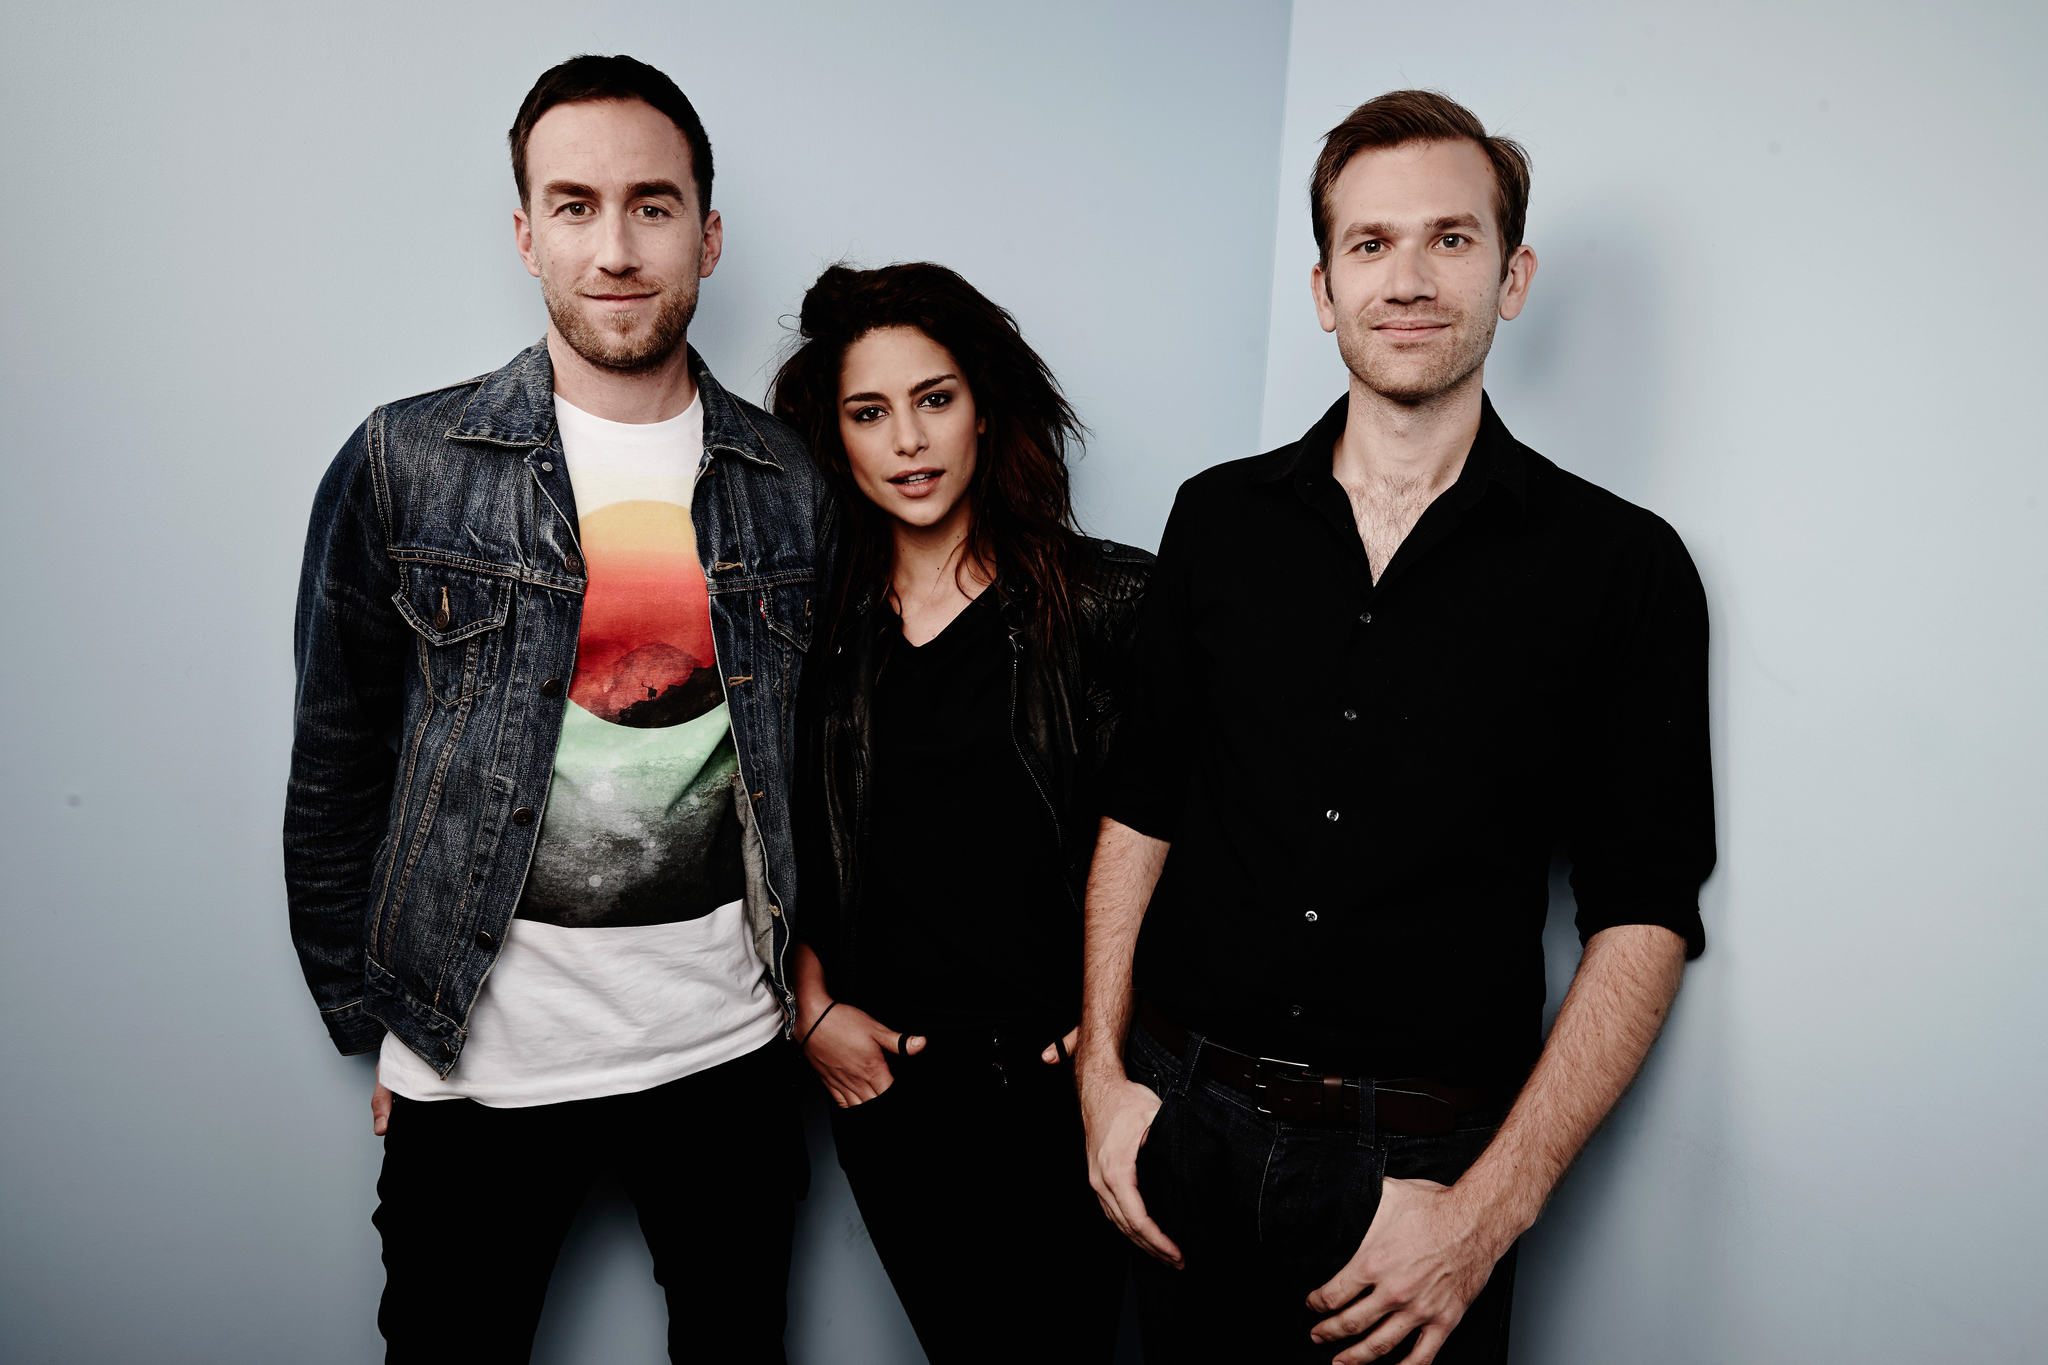 Aaron Moorhead, Justin Benson and Nadia Hilker at event of Spring (2014)